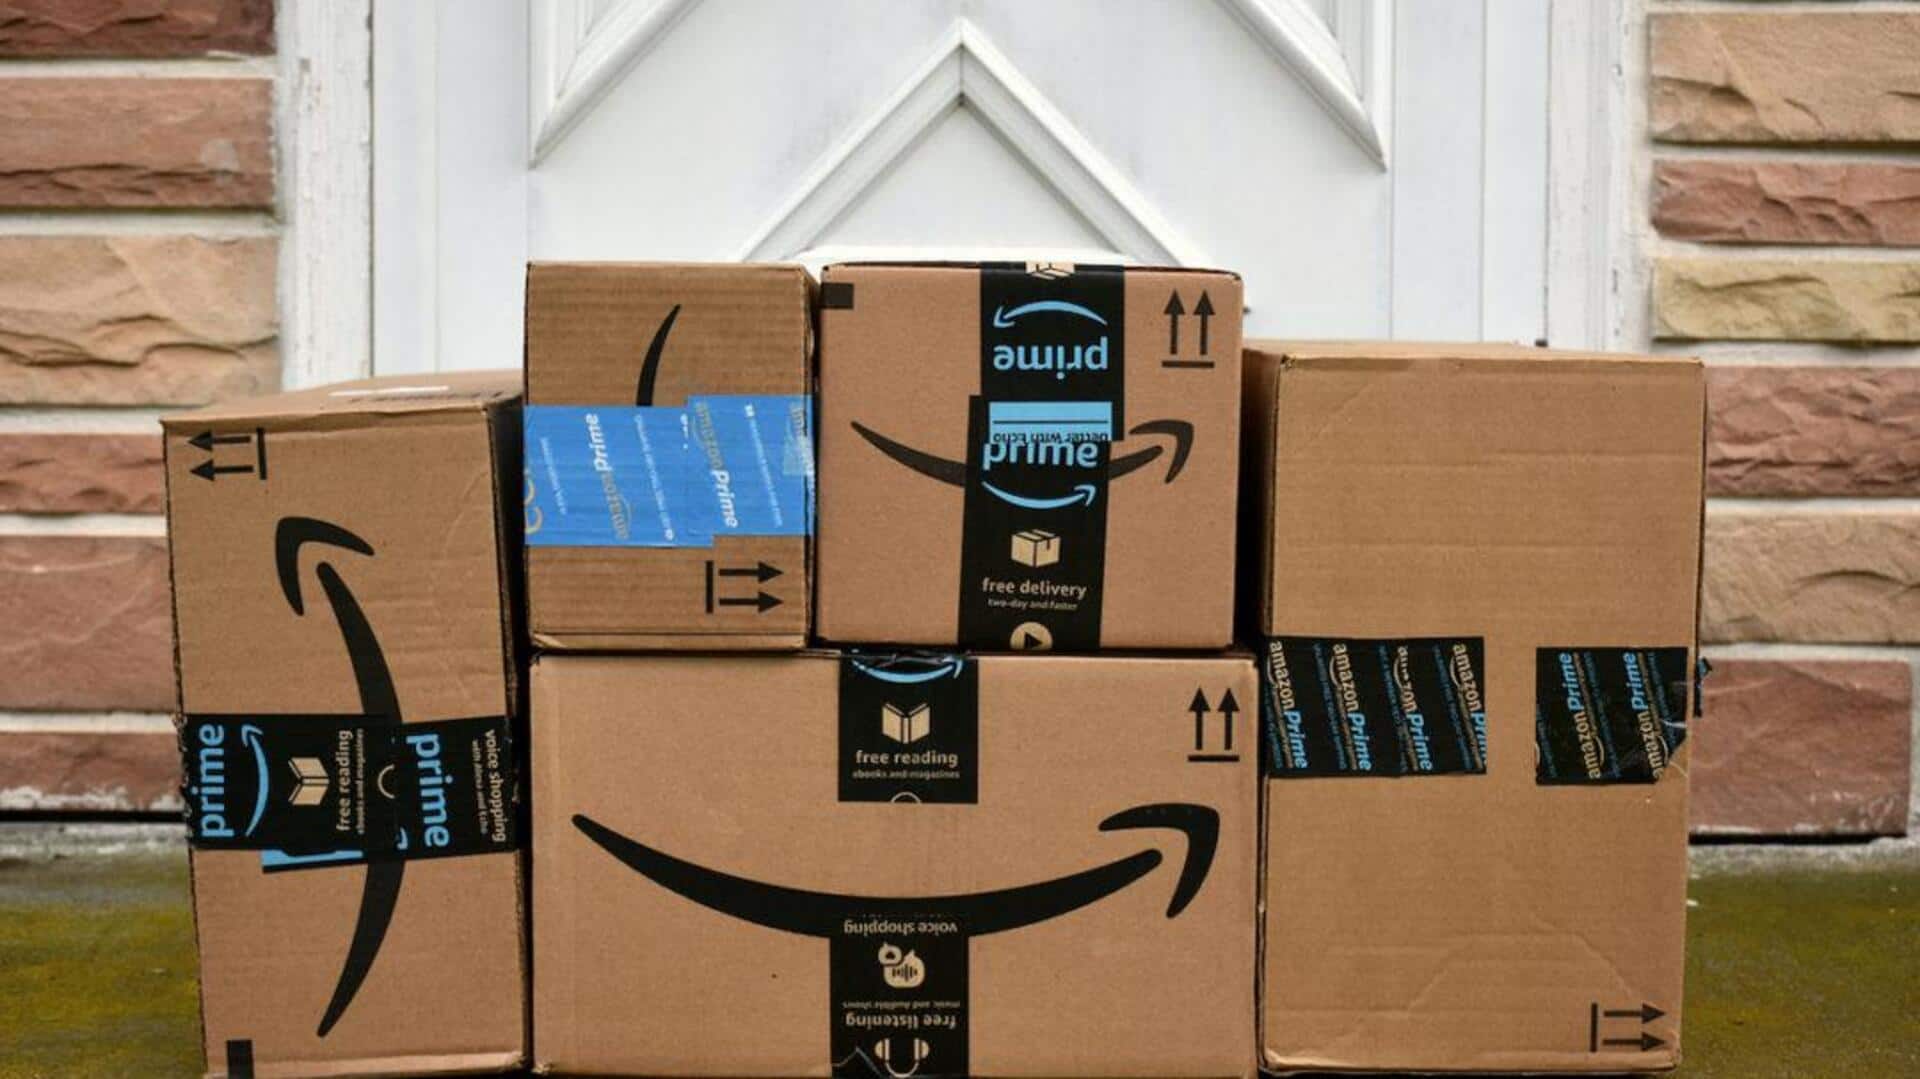 Most Indian shoppers favor less packaging, Amazon survey finds